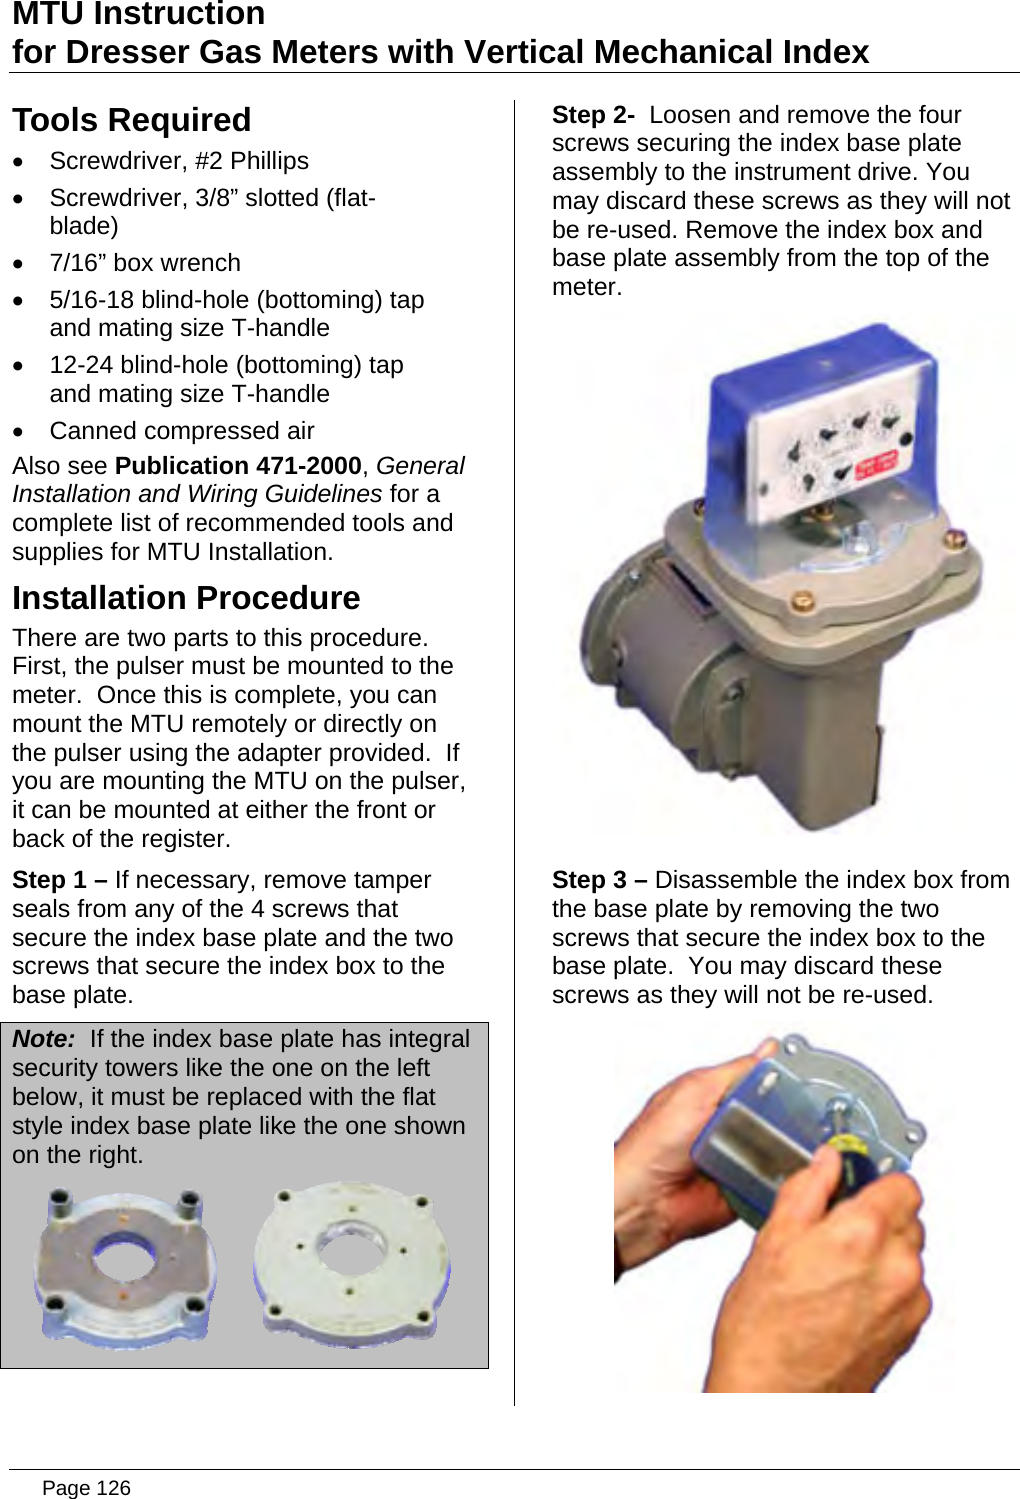 Page 126 of Aclara Technologies 09015 Transmitter for Meter Reading User Manual users manual